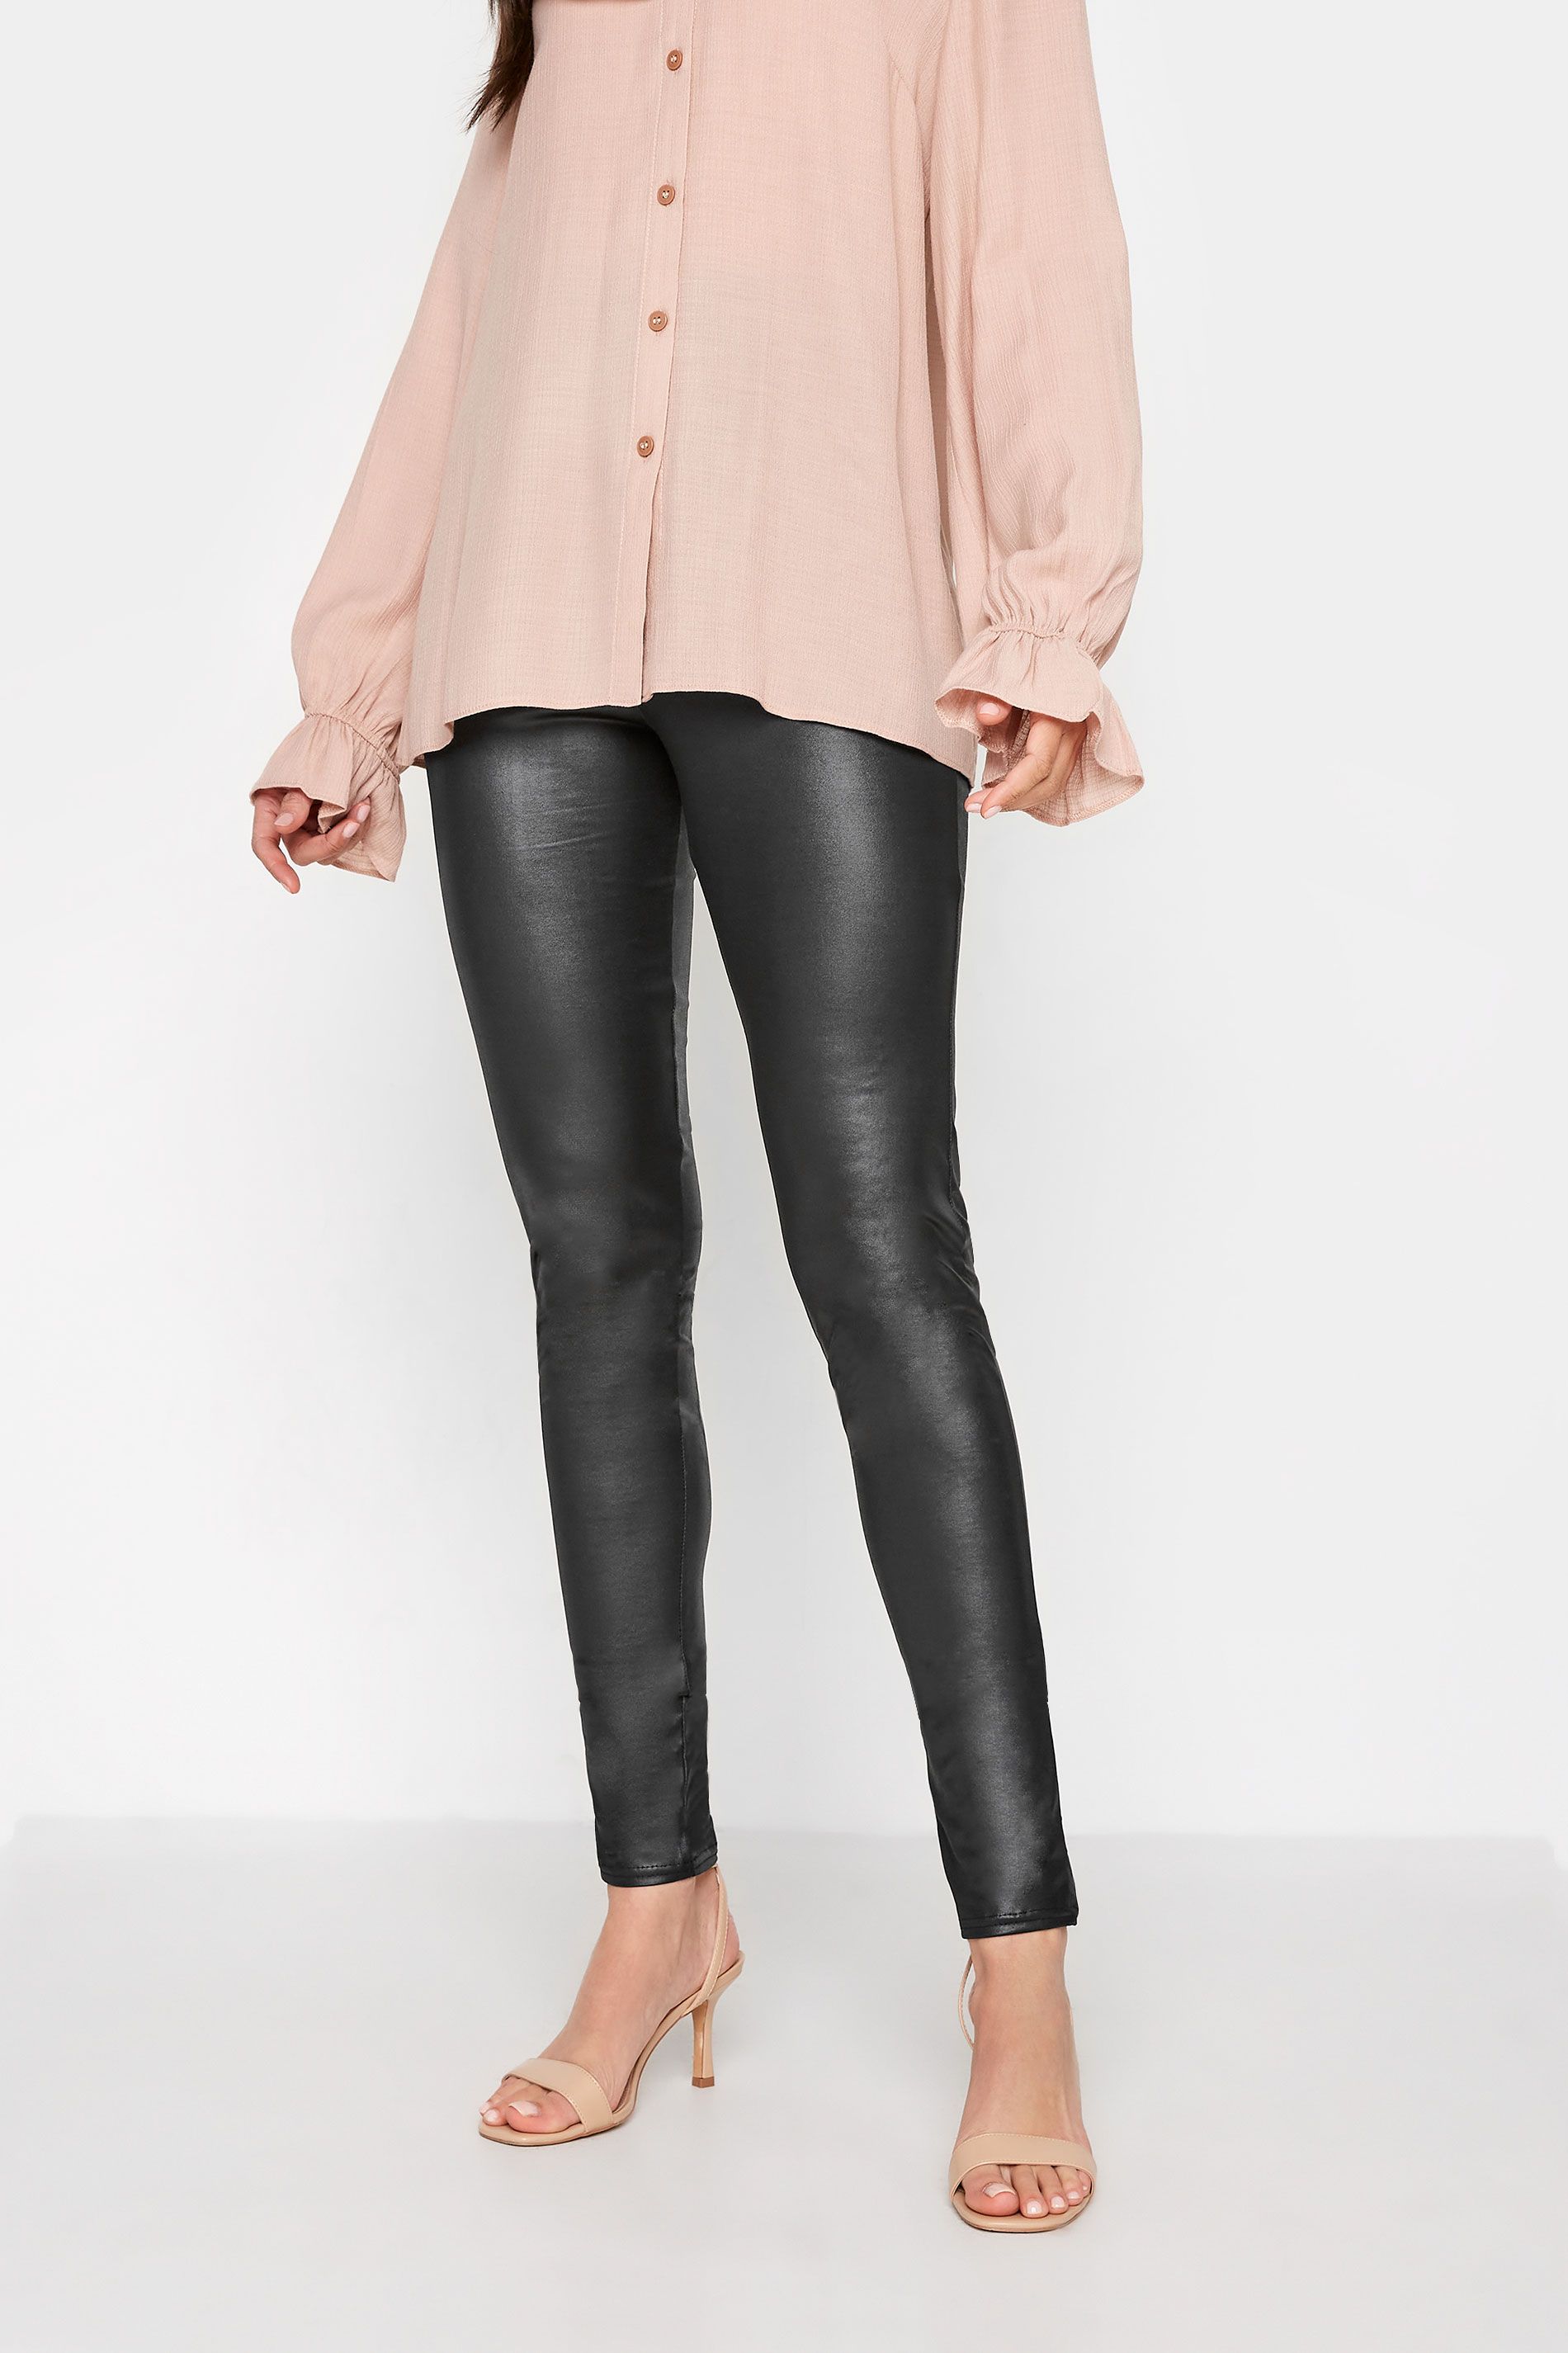 Tall Women's LTS Black Faux Leather Look Leggings | Long Tall Sally | Long Tall Sally